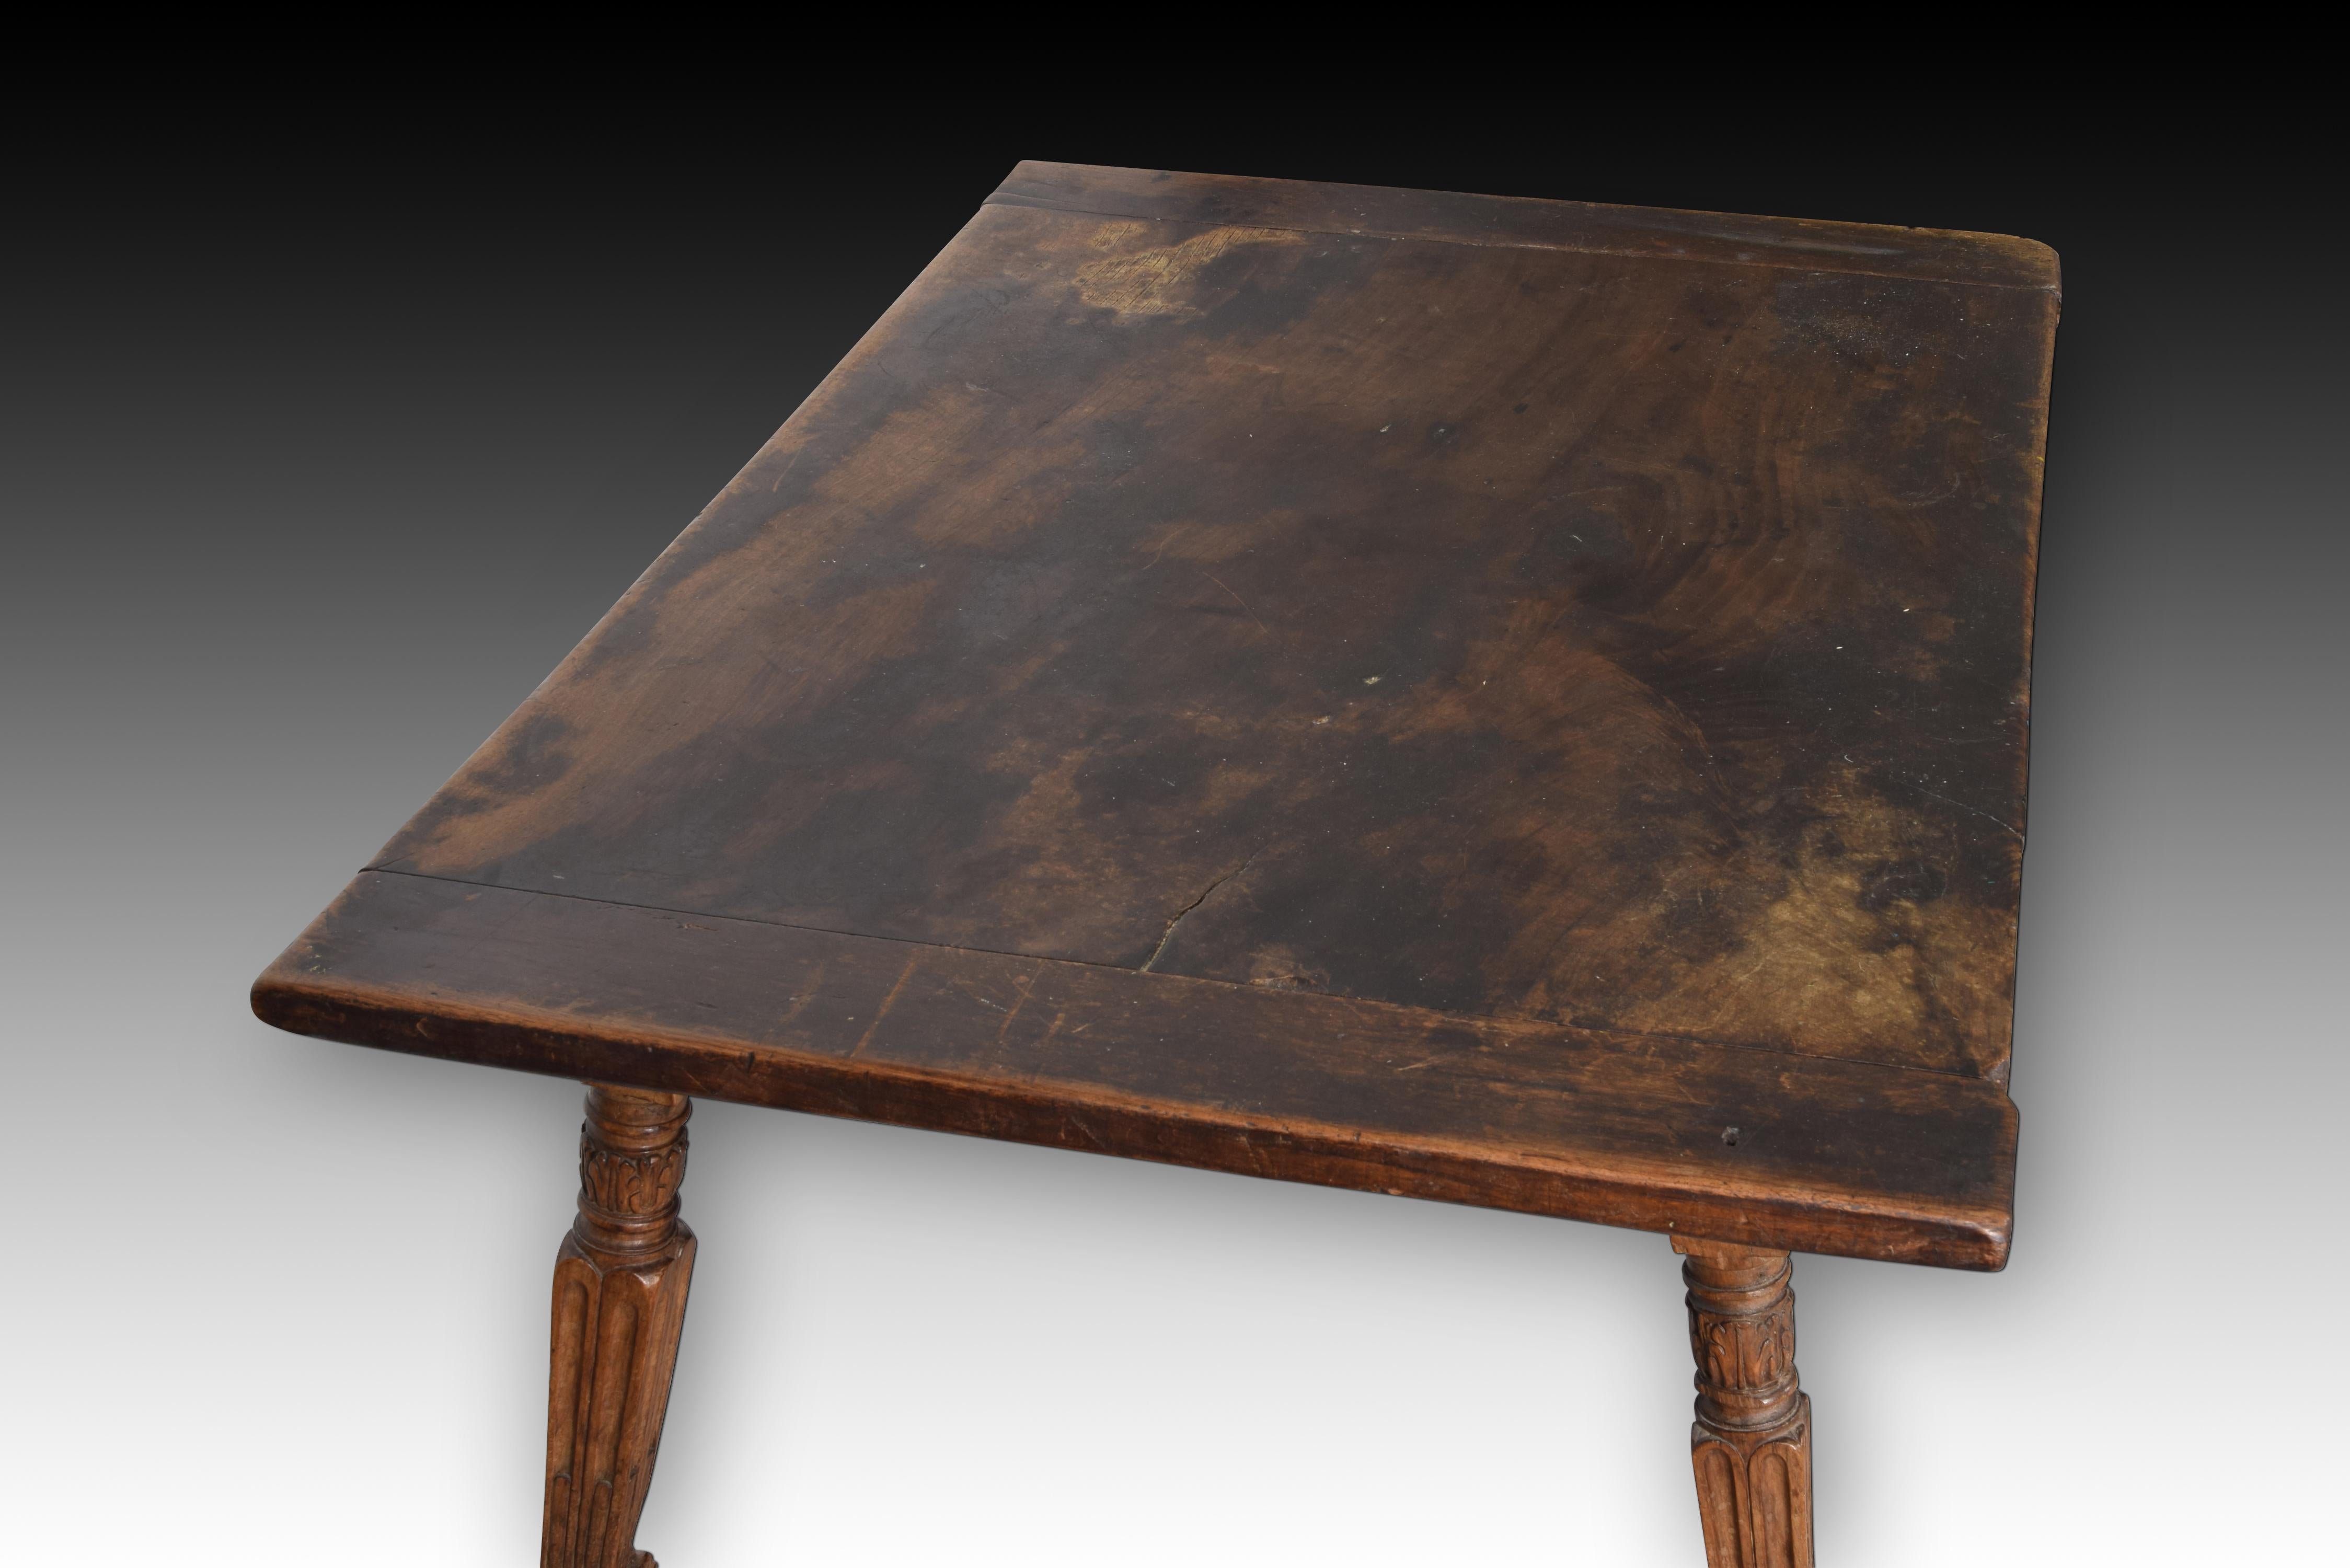 Table with grooved leg. Walnut, iron. Spain, 16th century. 
Requires restoration.
 Carved walnut table with a rectangular top and carved legs reminiscent of architectural elements with a strong classicist influence that are each joined by a wooden